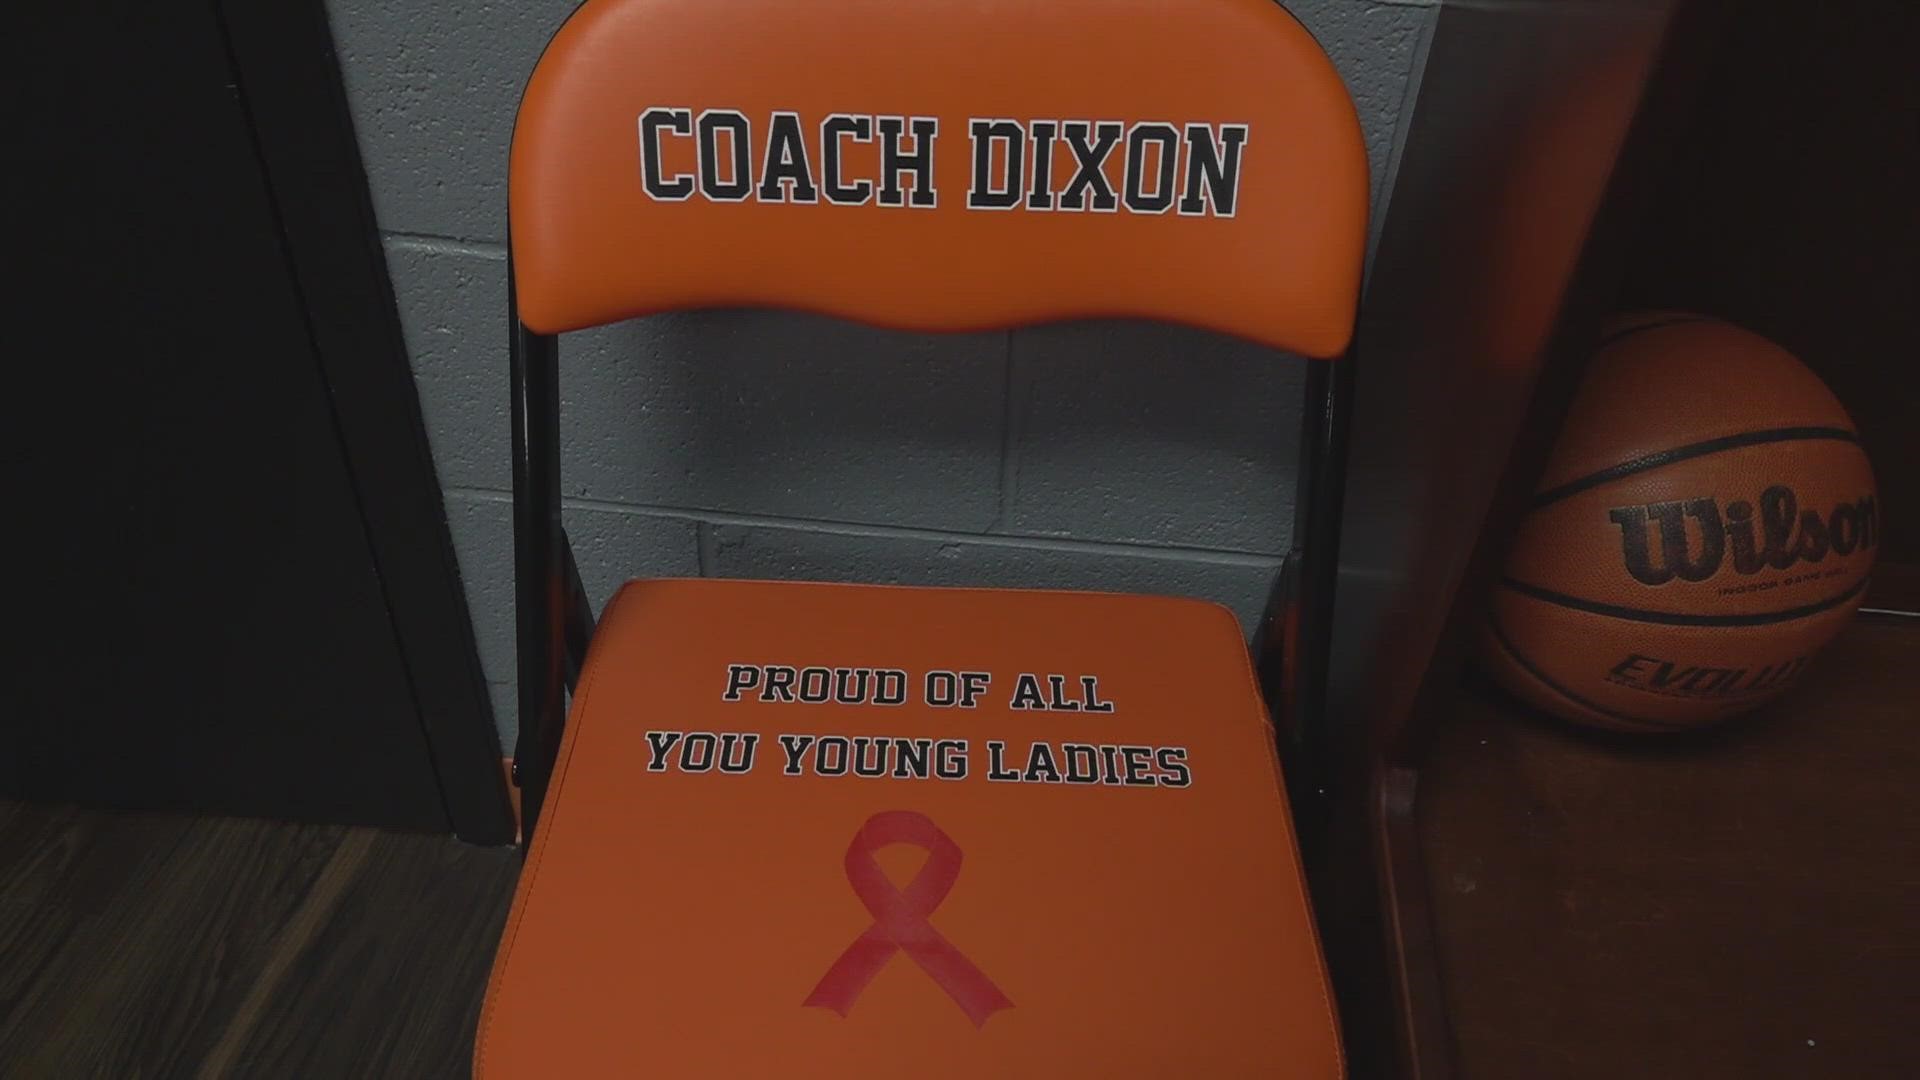 Dixon died last summer due to heart failure. He dedicated years to supporting the Clinton girl's basketball team as their assistant coach.